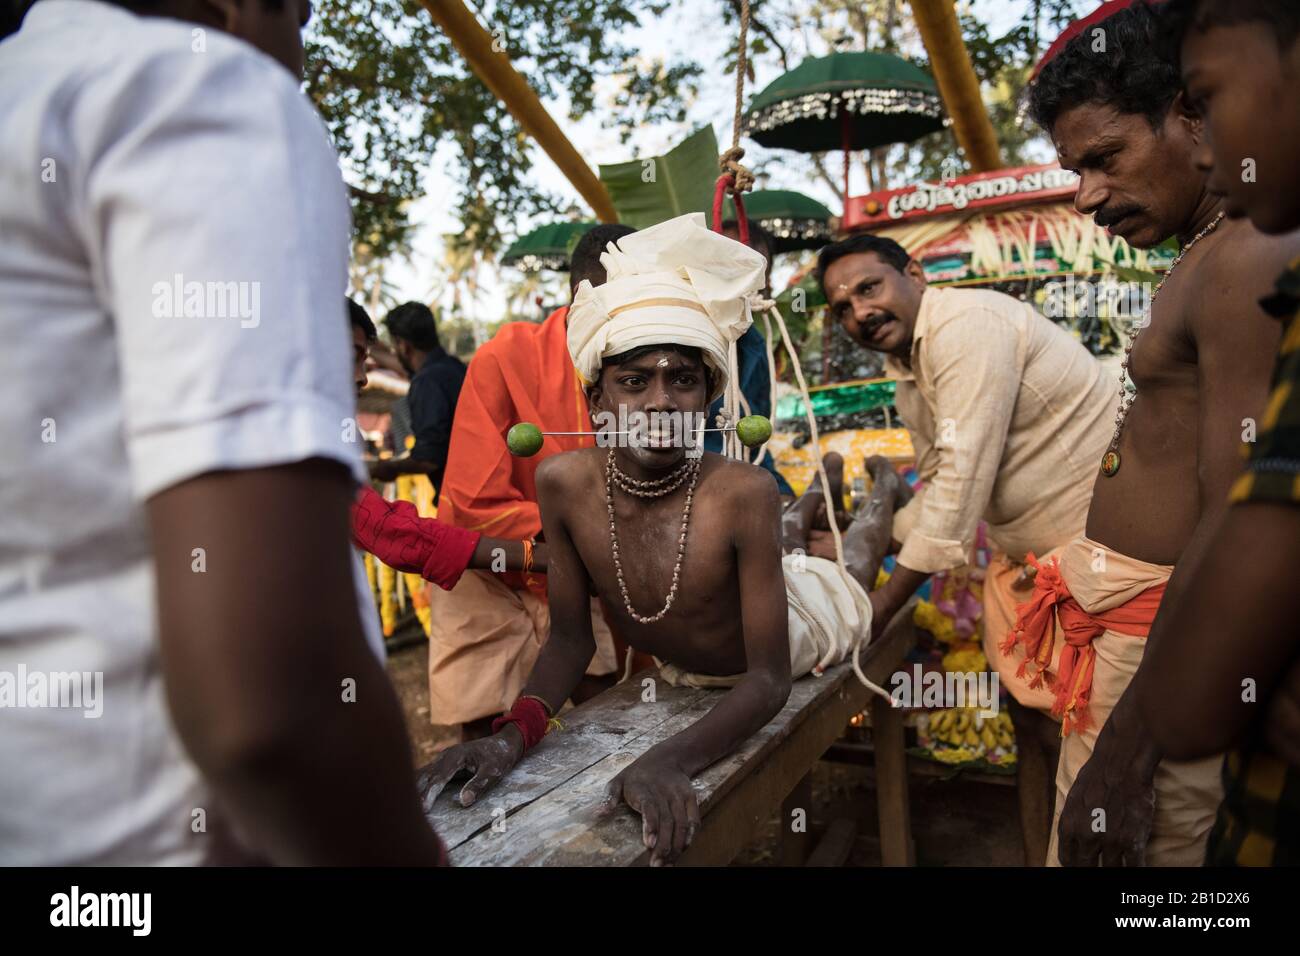 Devotee with spear-pierced mouths (Kavadi Aattam) as an act of devotion during Thaipooyam, or Thaipoosam, Festival in Kedakulam, Kerala. Stock Photo